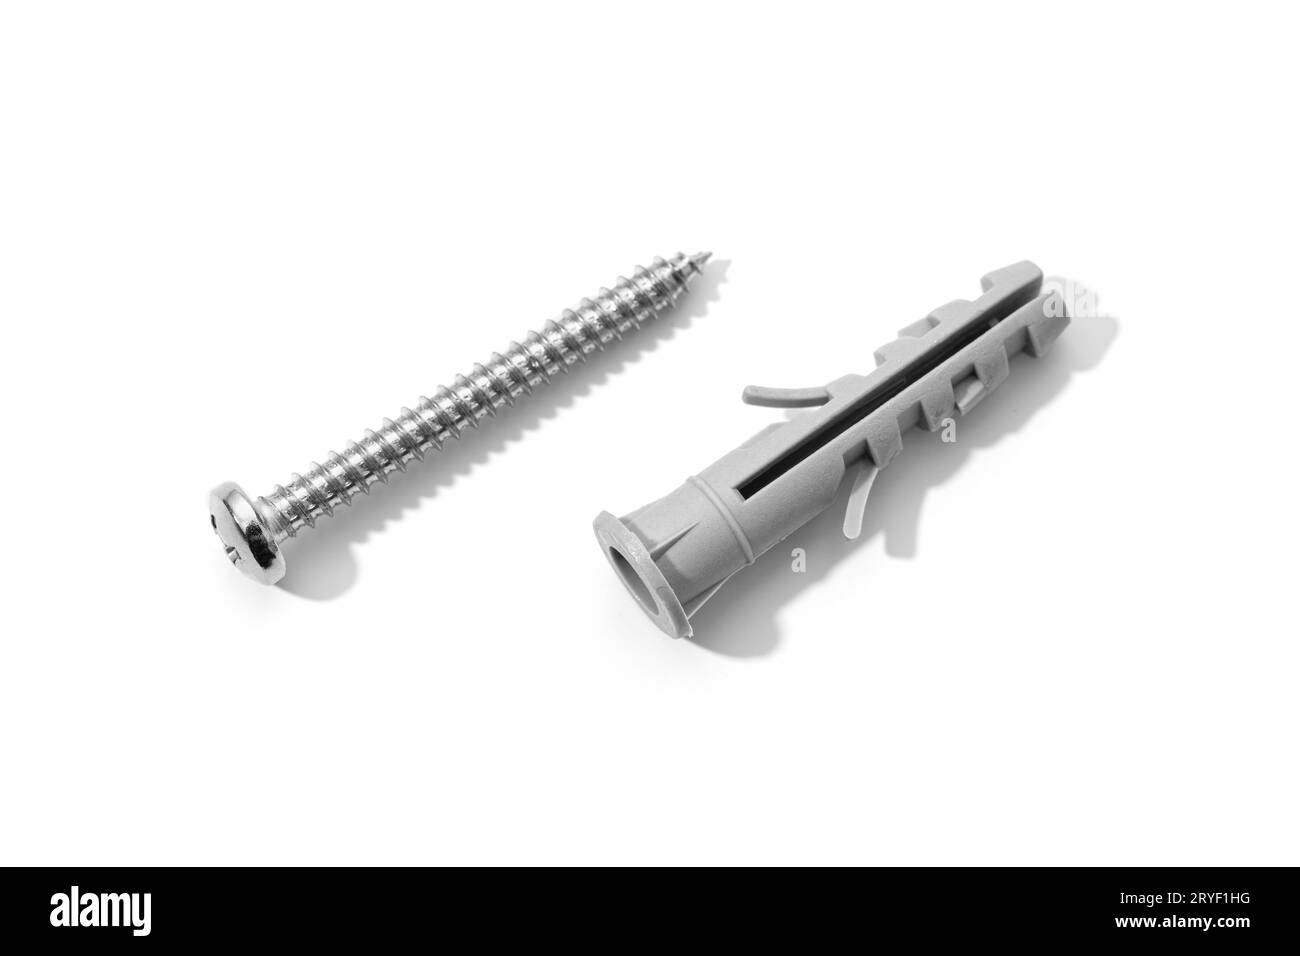 Plastic dowel and screw isolated on a white background. Expansion anchors or fixing dowel with chromed screw Stock Photo